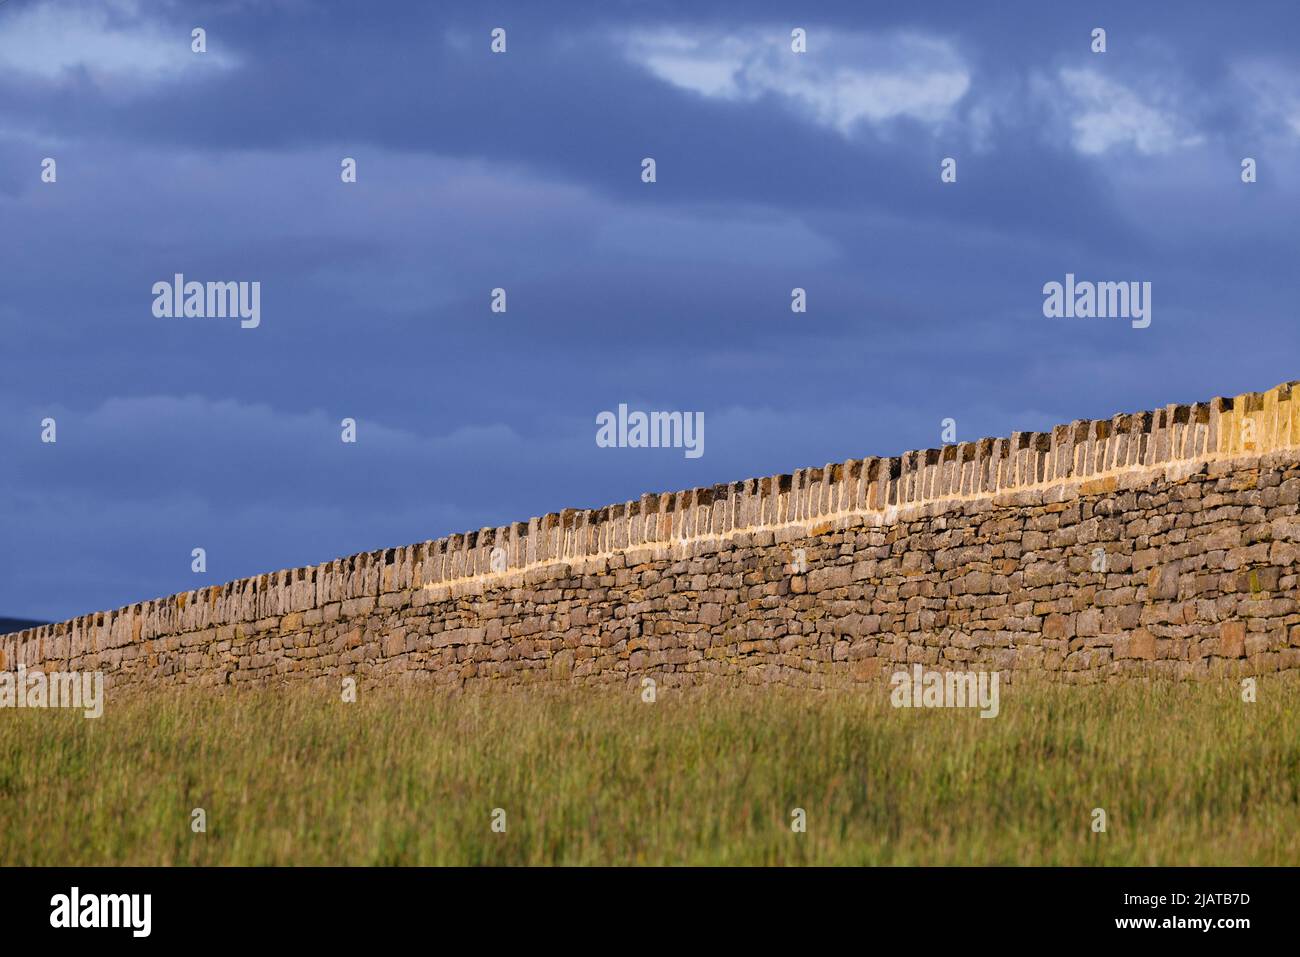 Dry stone wall in Bury countryside. Stock Photo